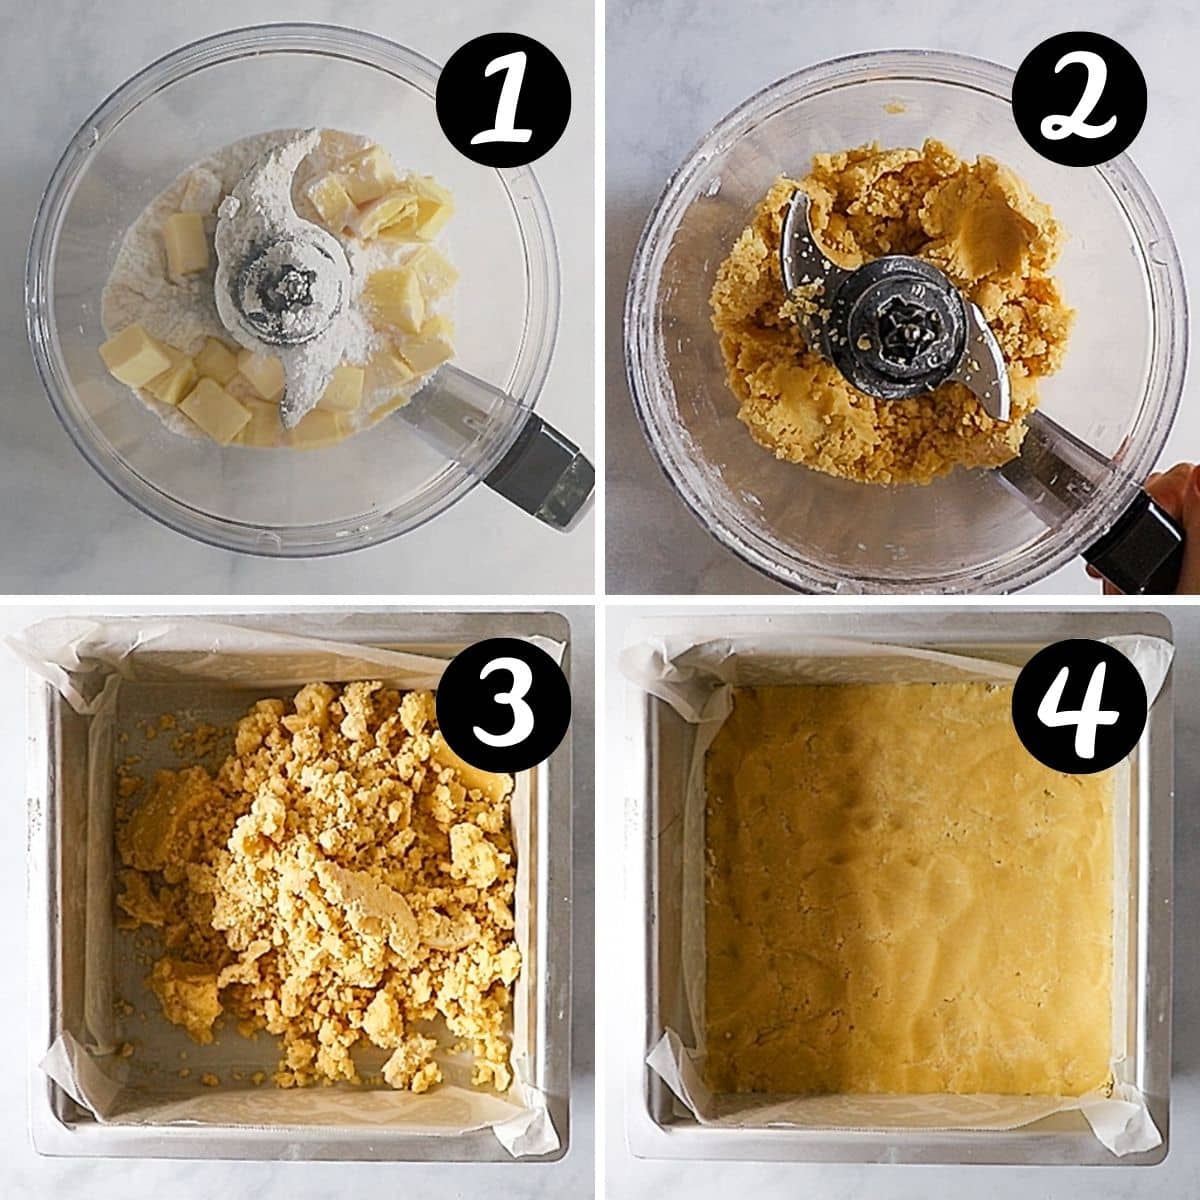 step by step photos showing a shortbread base being made in a food processor